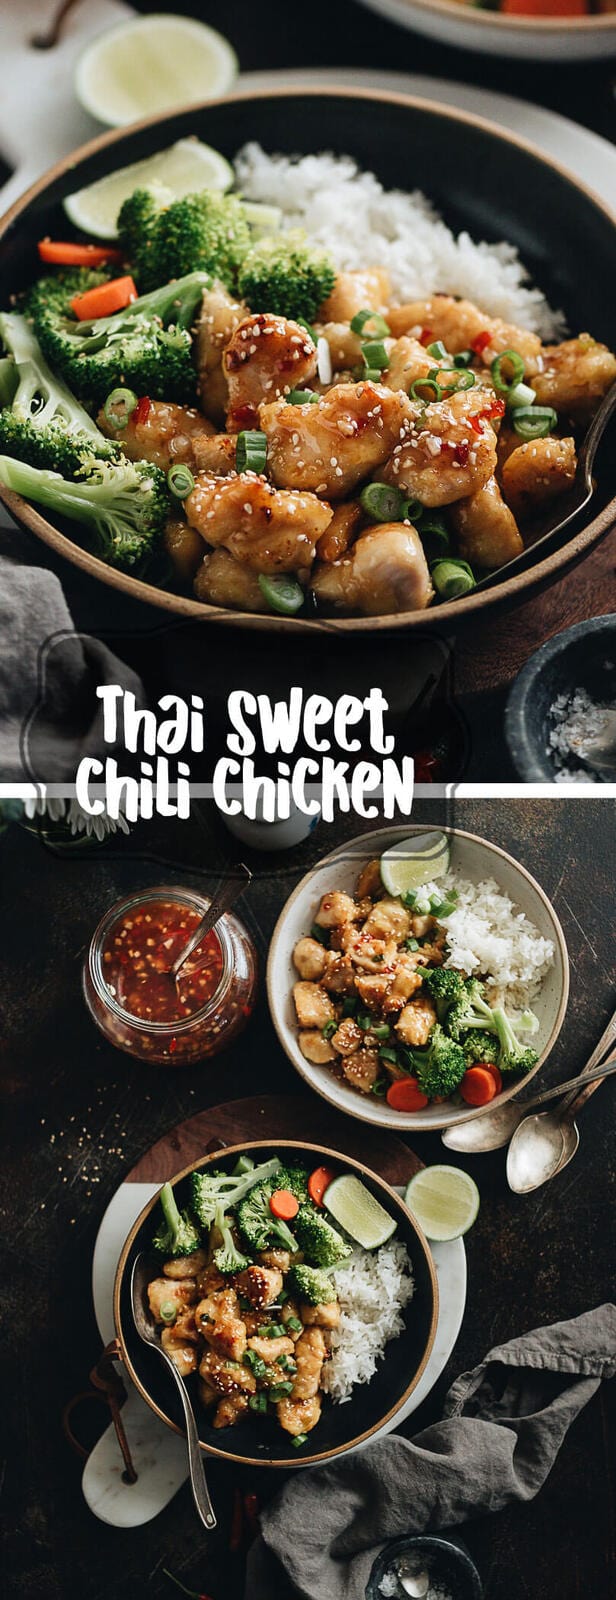 Thai Sweet Chili Chicken - An easy recipe that tastes even better than the takeout version, is fast to cook for your weekday dinner, and is healthier! {Gluten free adaptable}